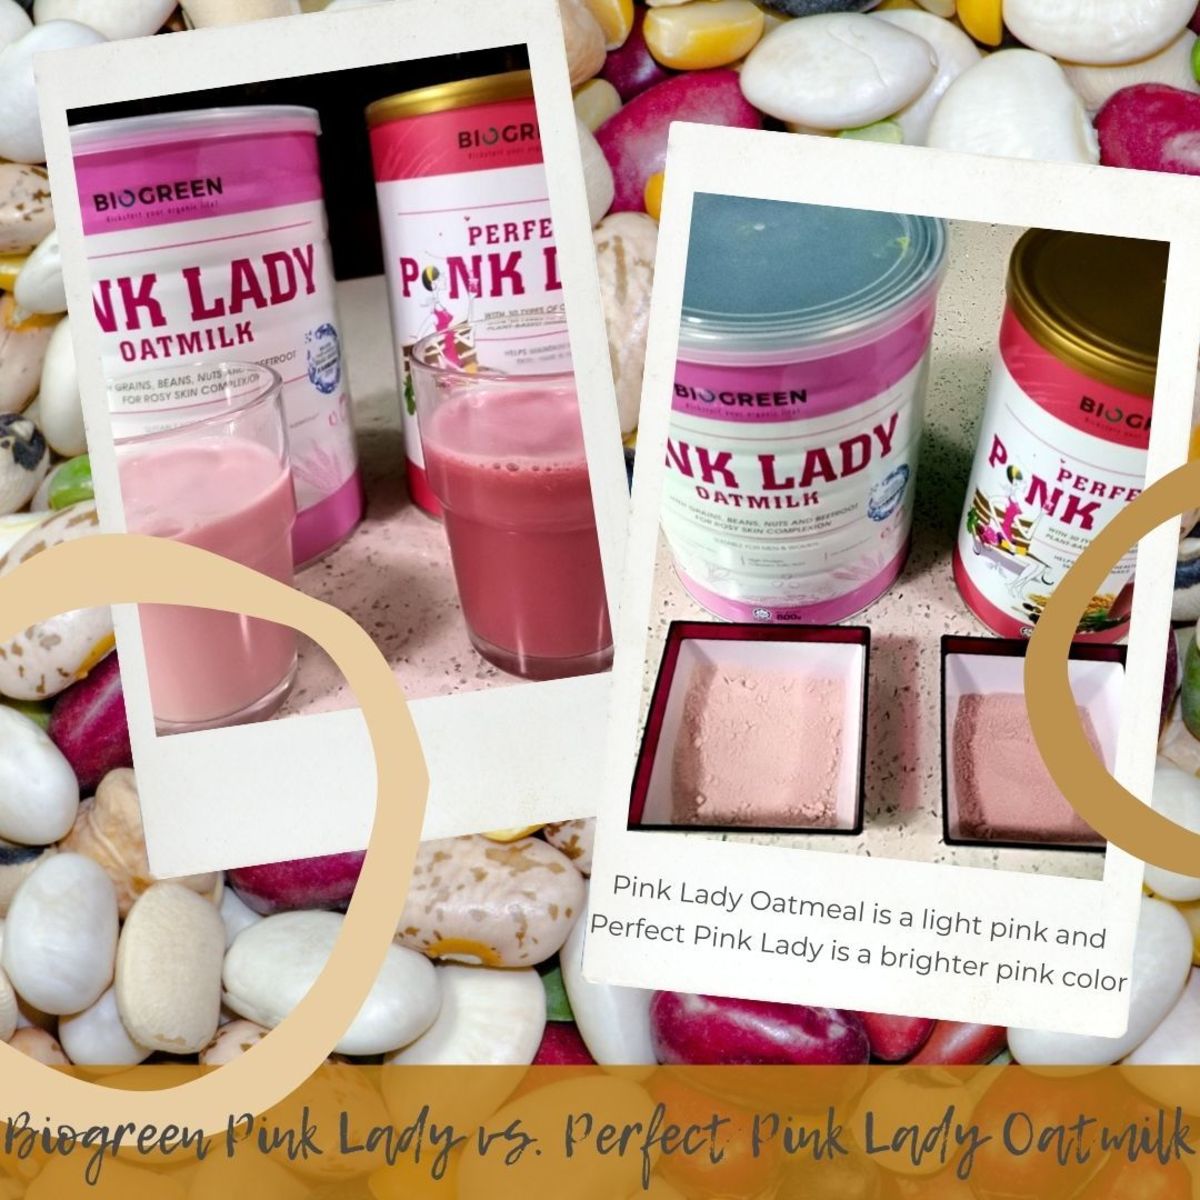 Biogreen Pink Lady Oatmilk is a lighter pink and Perfect Pink Lady Oatmilk is a brighter pink in color